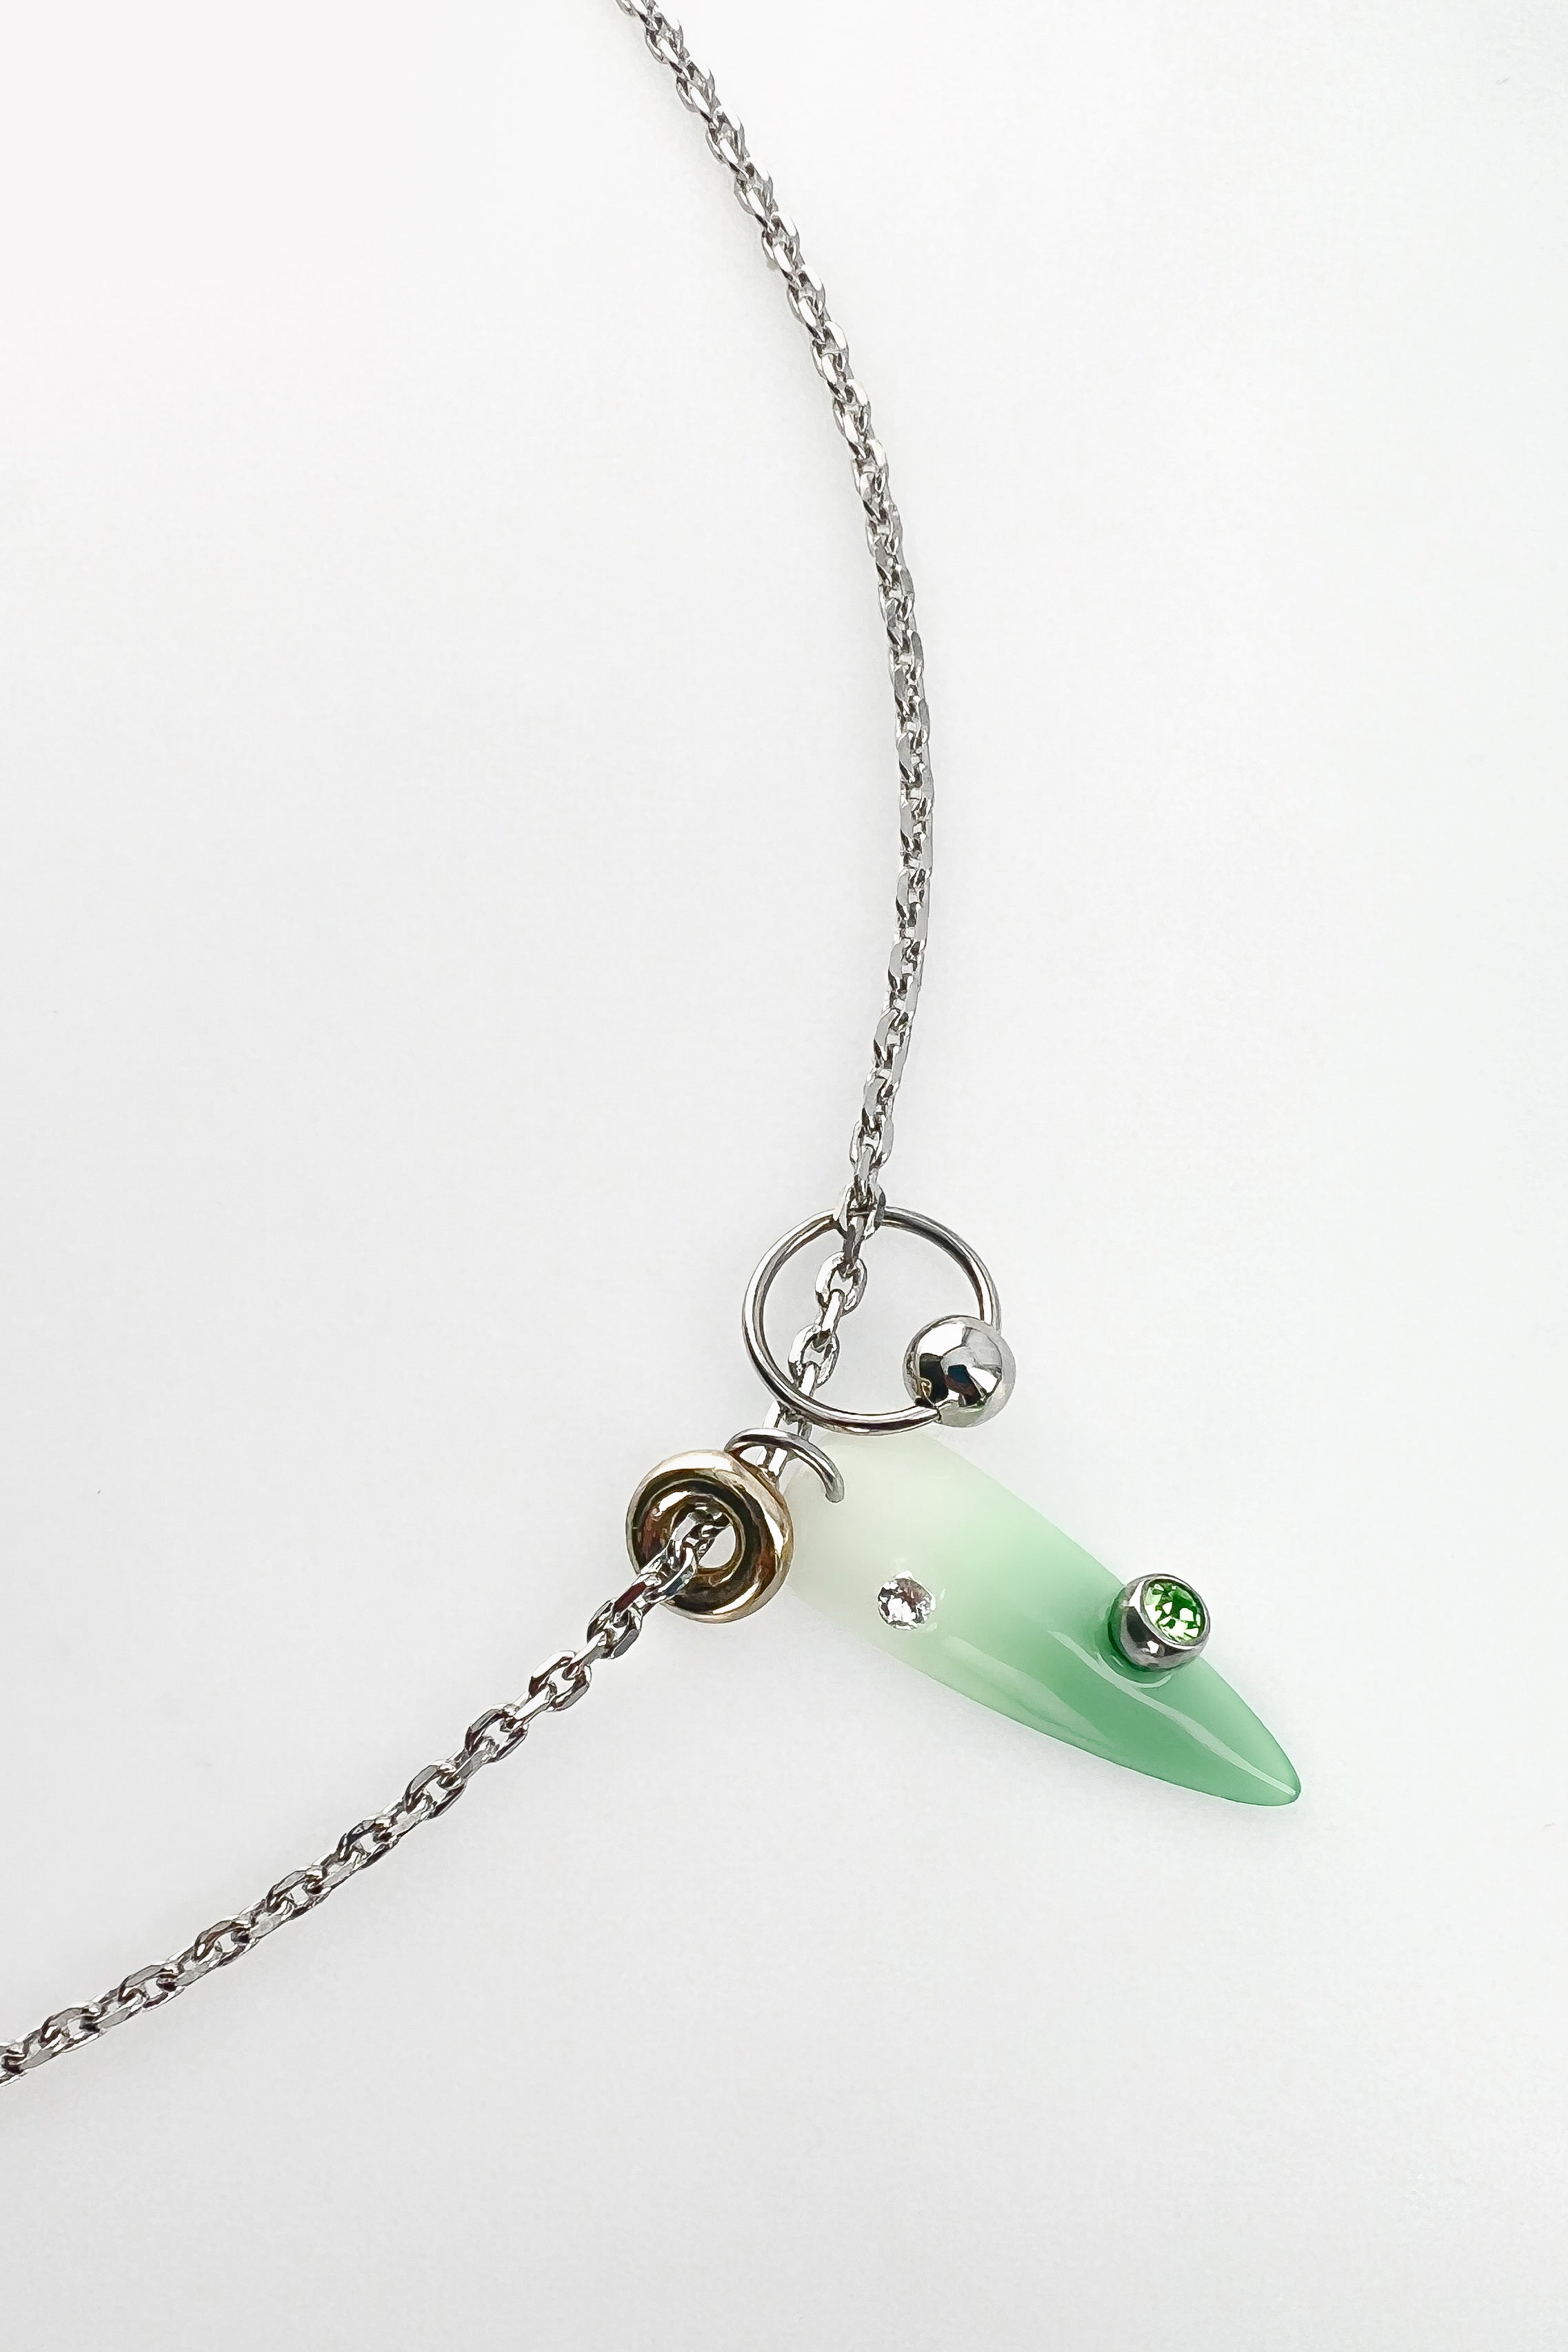 Nail green necklace